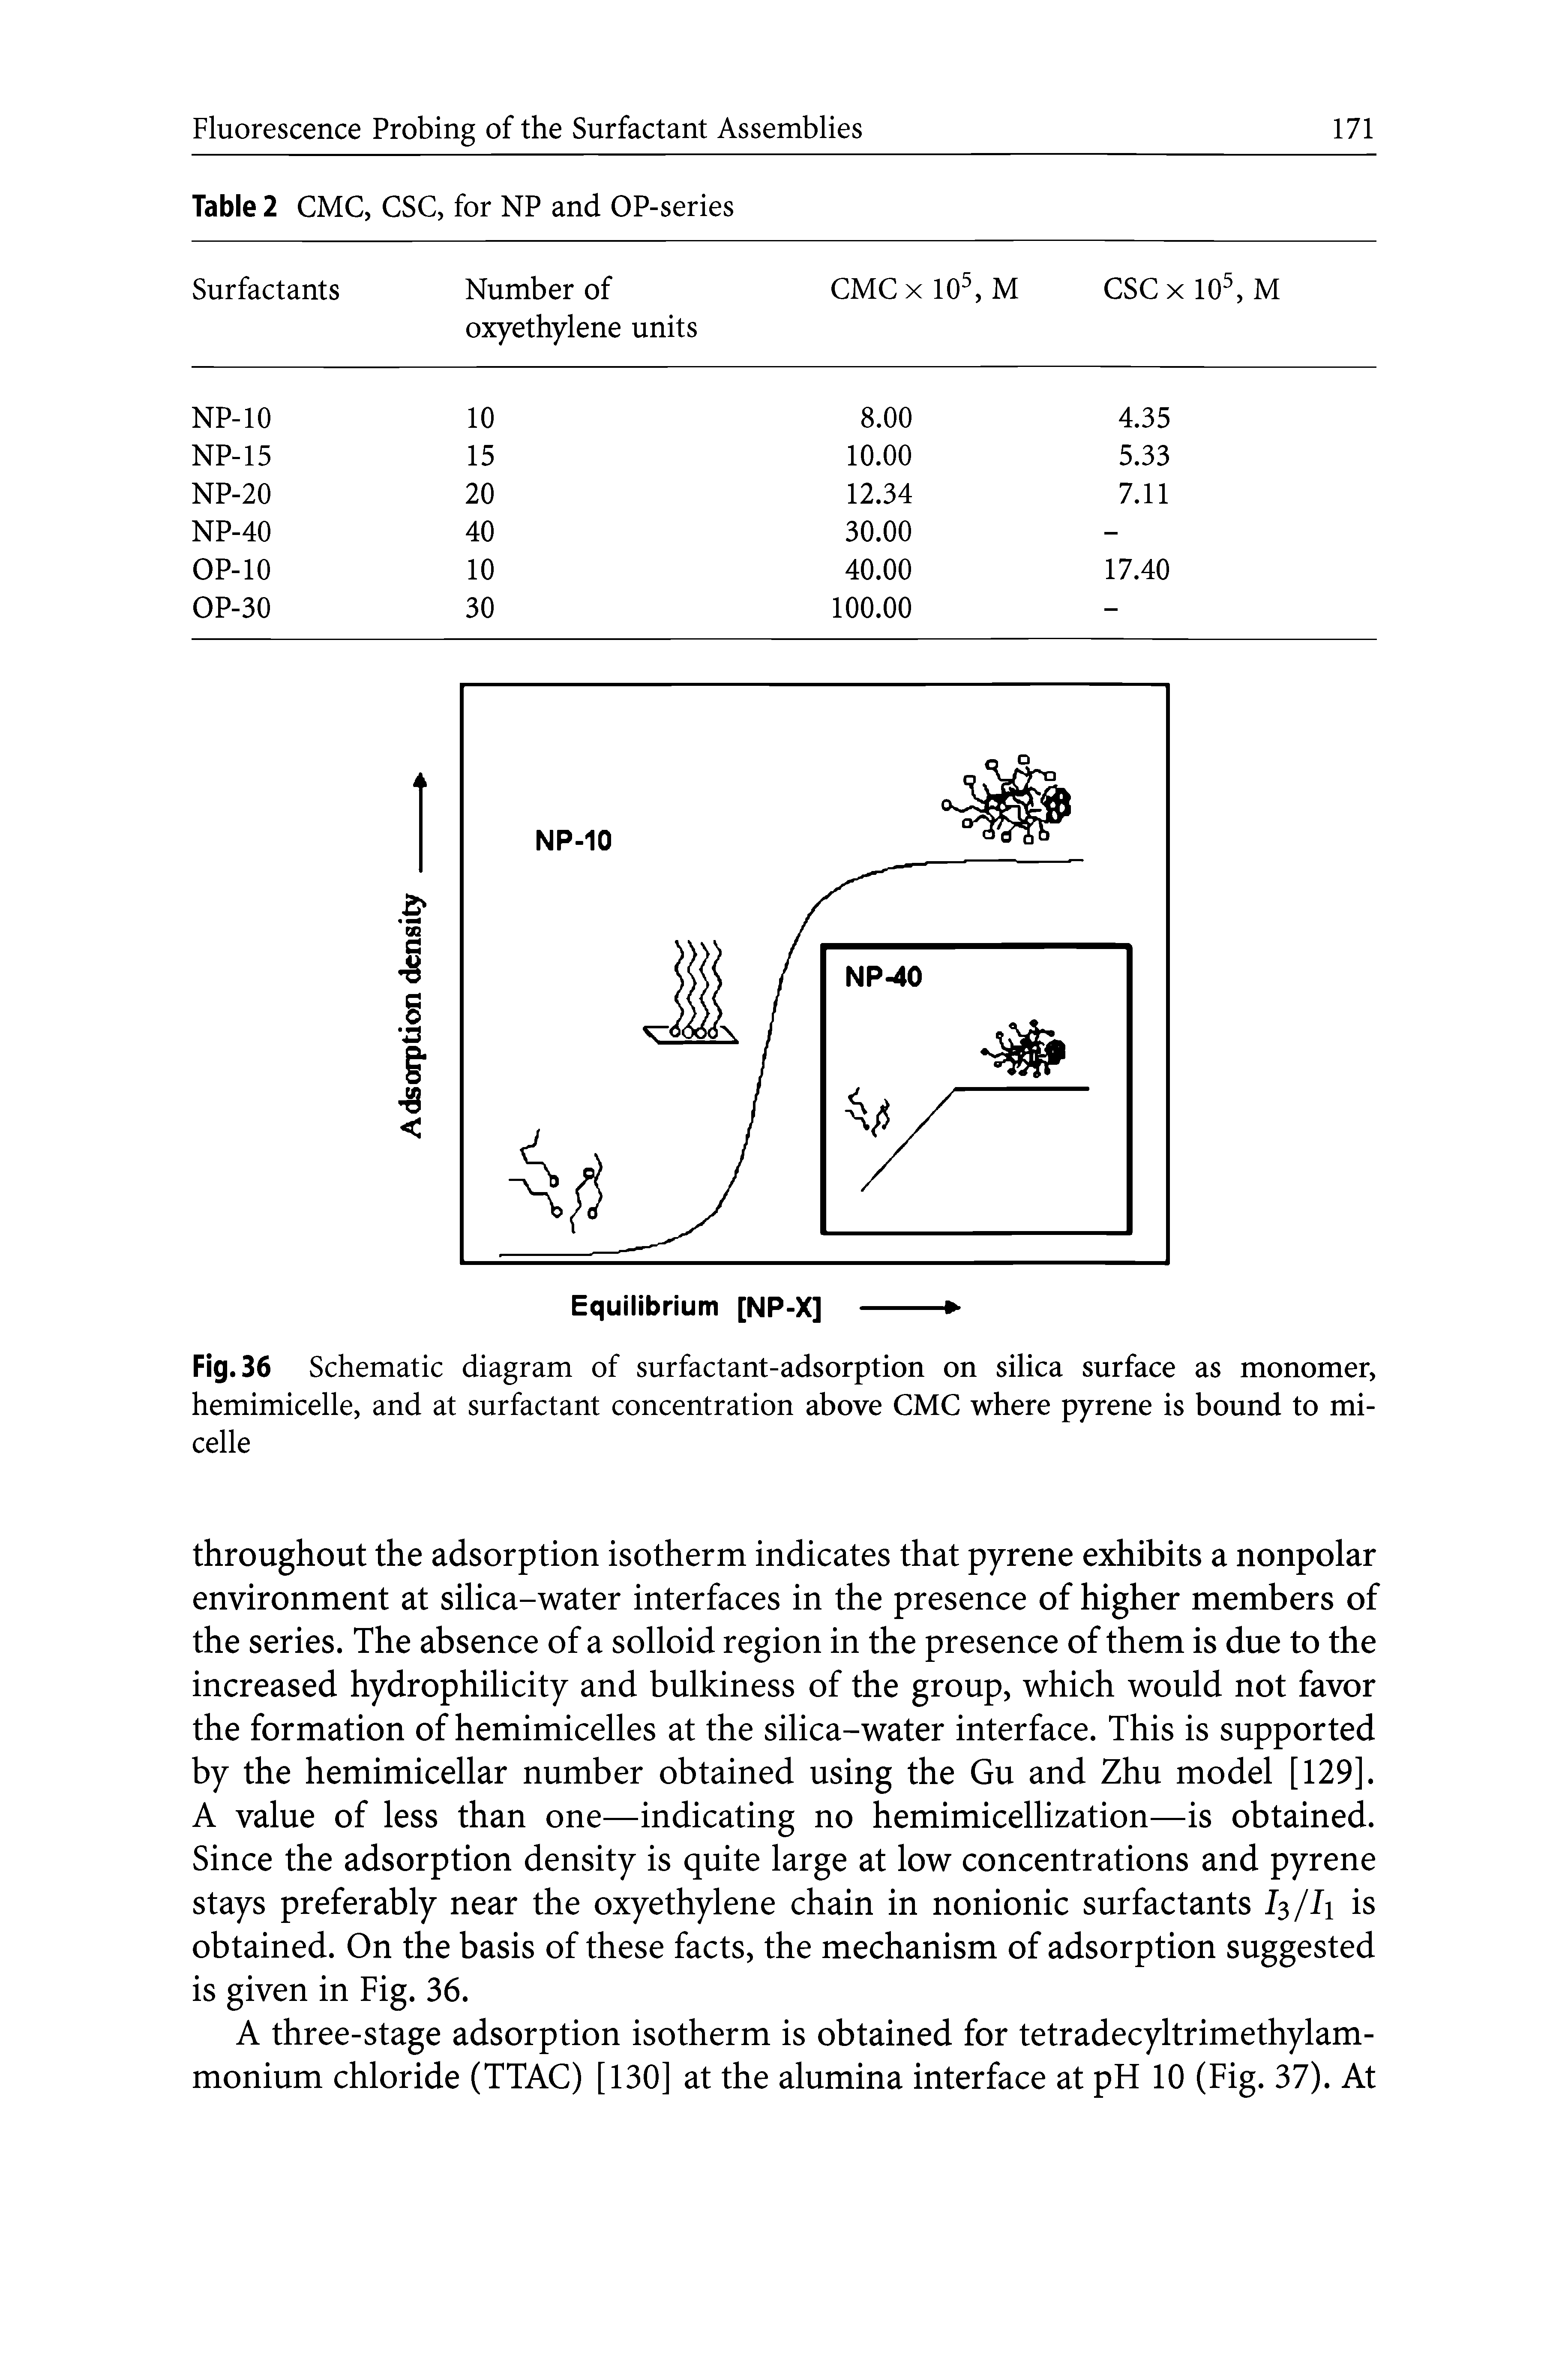 Fig. 36 Schematic diagram of surfactant-adsorption on silica surface as monomer, hemimicelle, and at surfactant concentration above CMC where pyrene is bound to micelle...